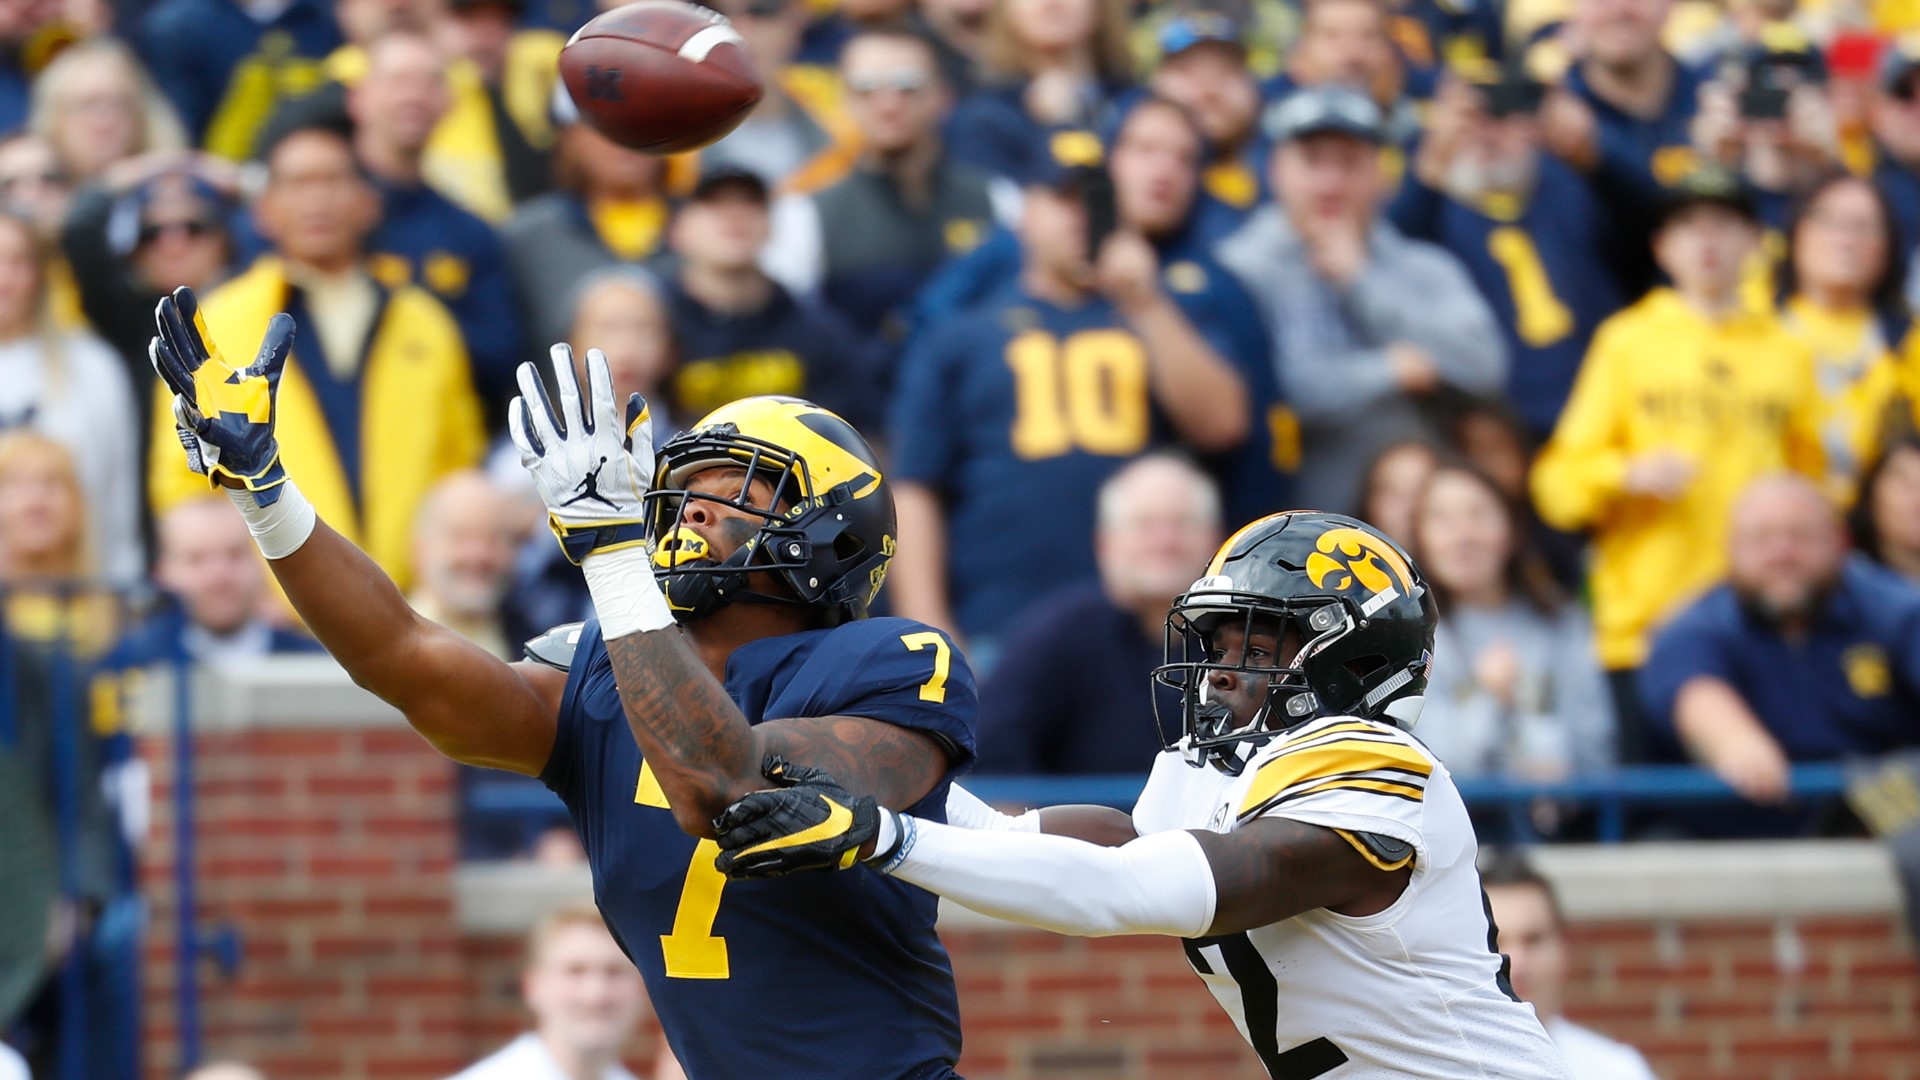 The Wolverines are "without a significant number of players", the school said in a release.